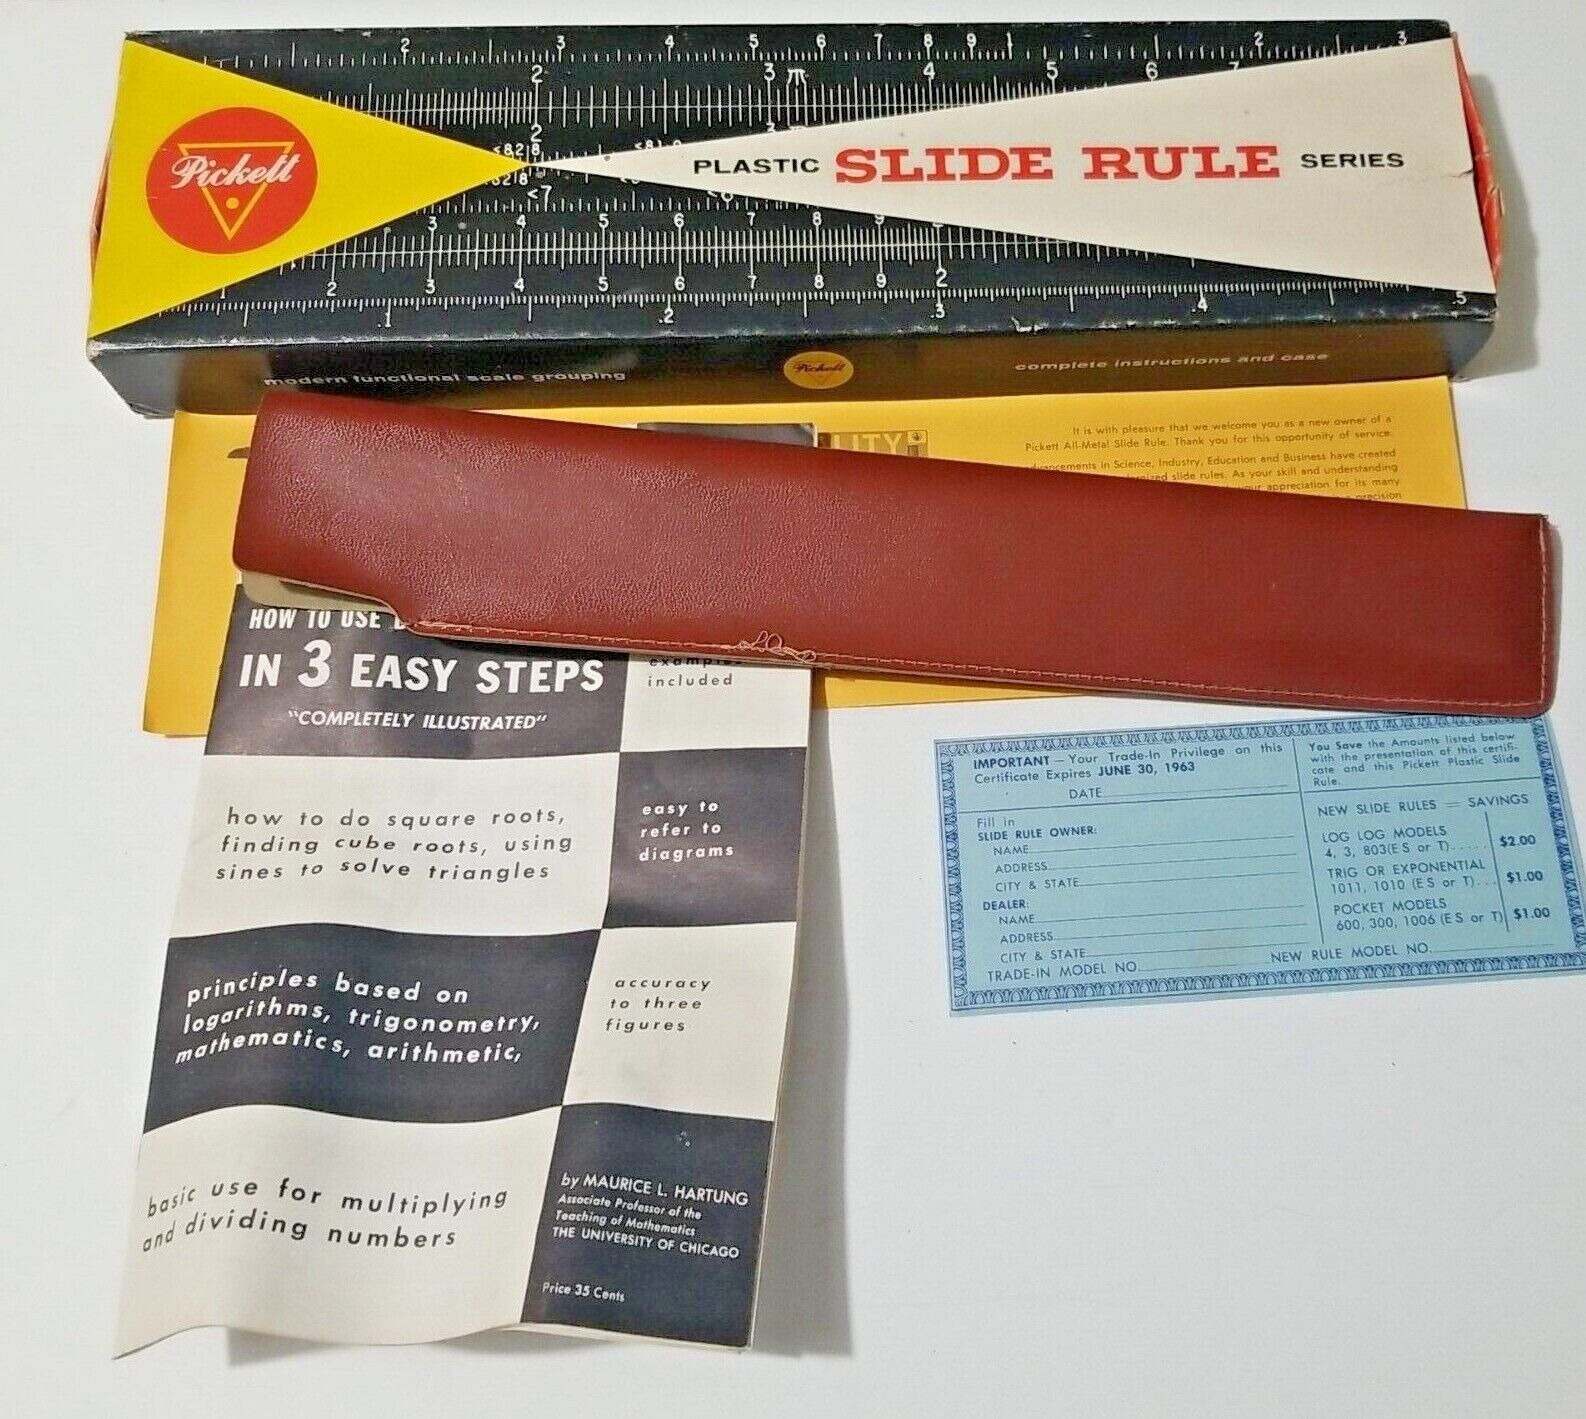 Pickett Microline 121 Trainer Slide Rule with Case /Instructions Made In USA - $19.99